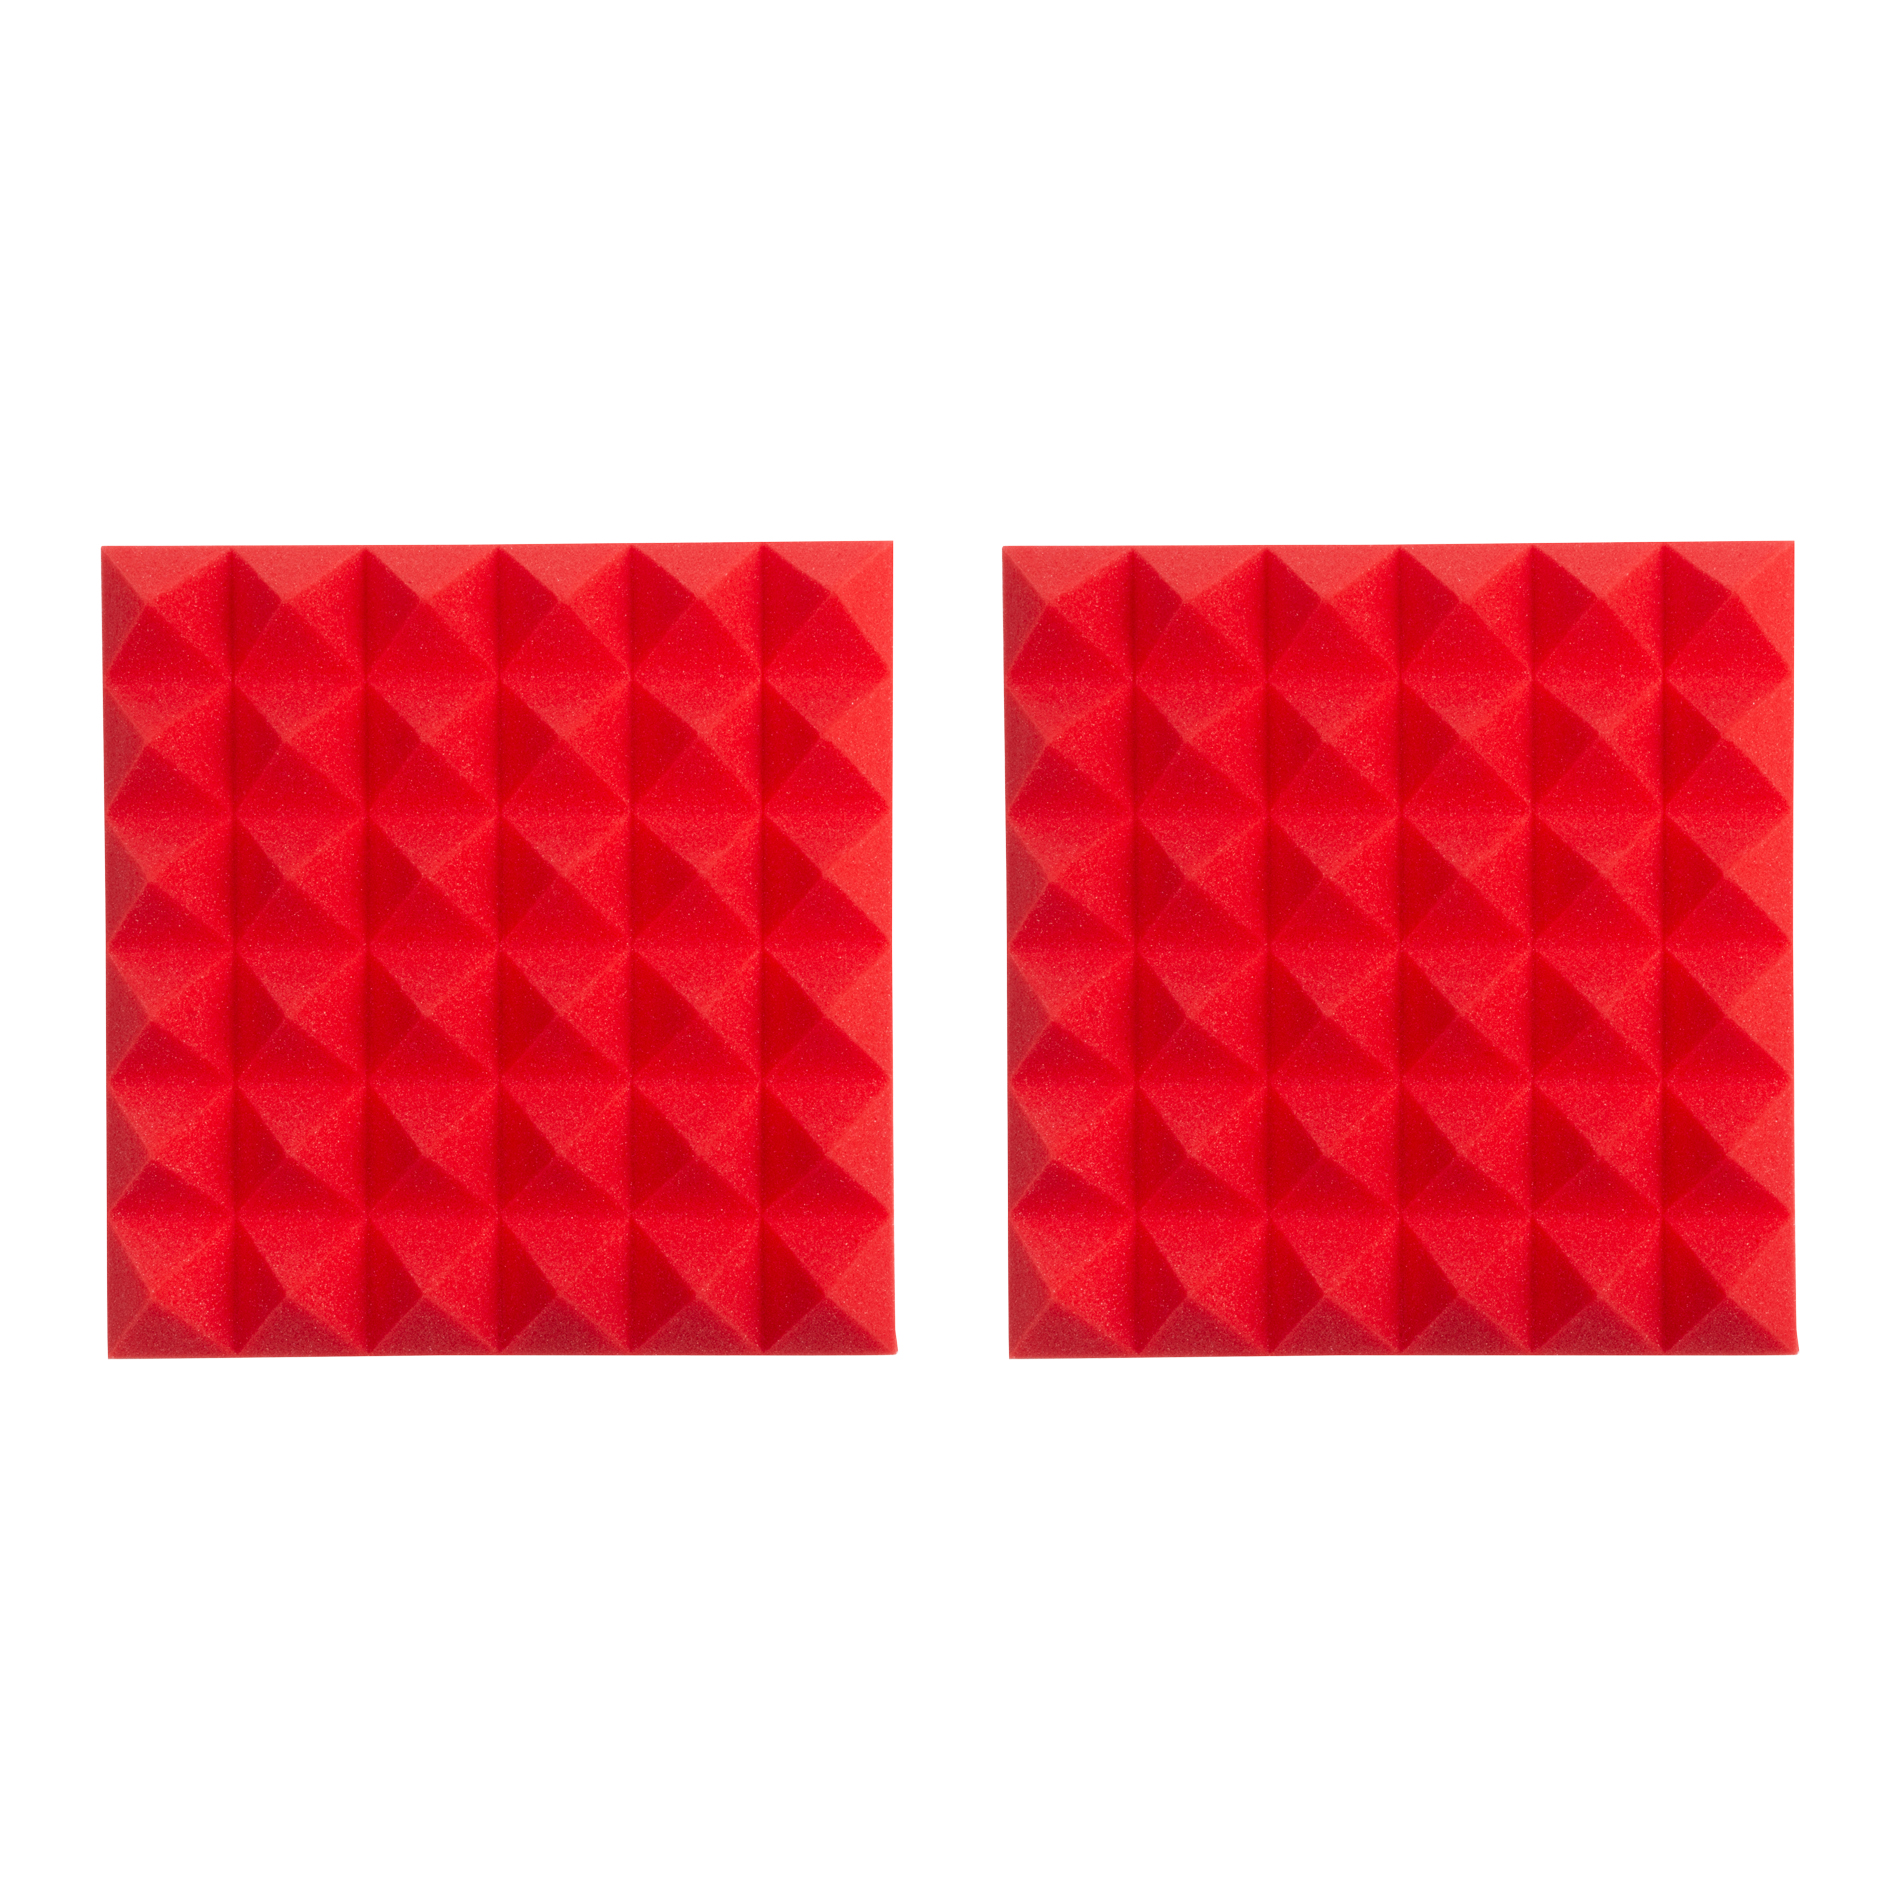 Herske dollar ring 2 Pack of Red 12x12" Acoustic Pyramid Panel-GFW-ACPNL1212PRED-2PK - Gator  Cases